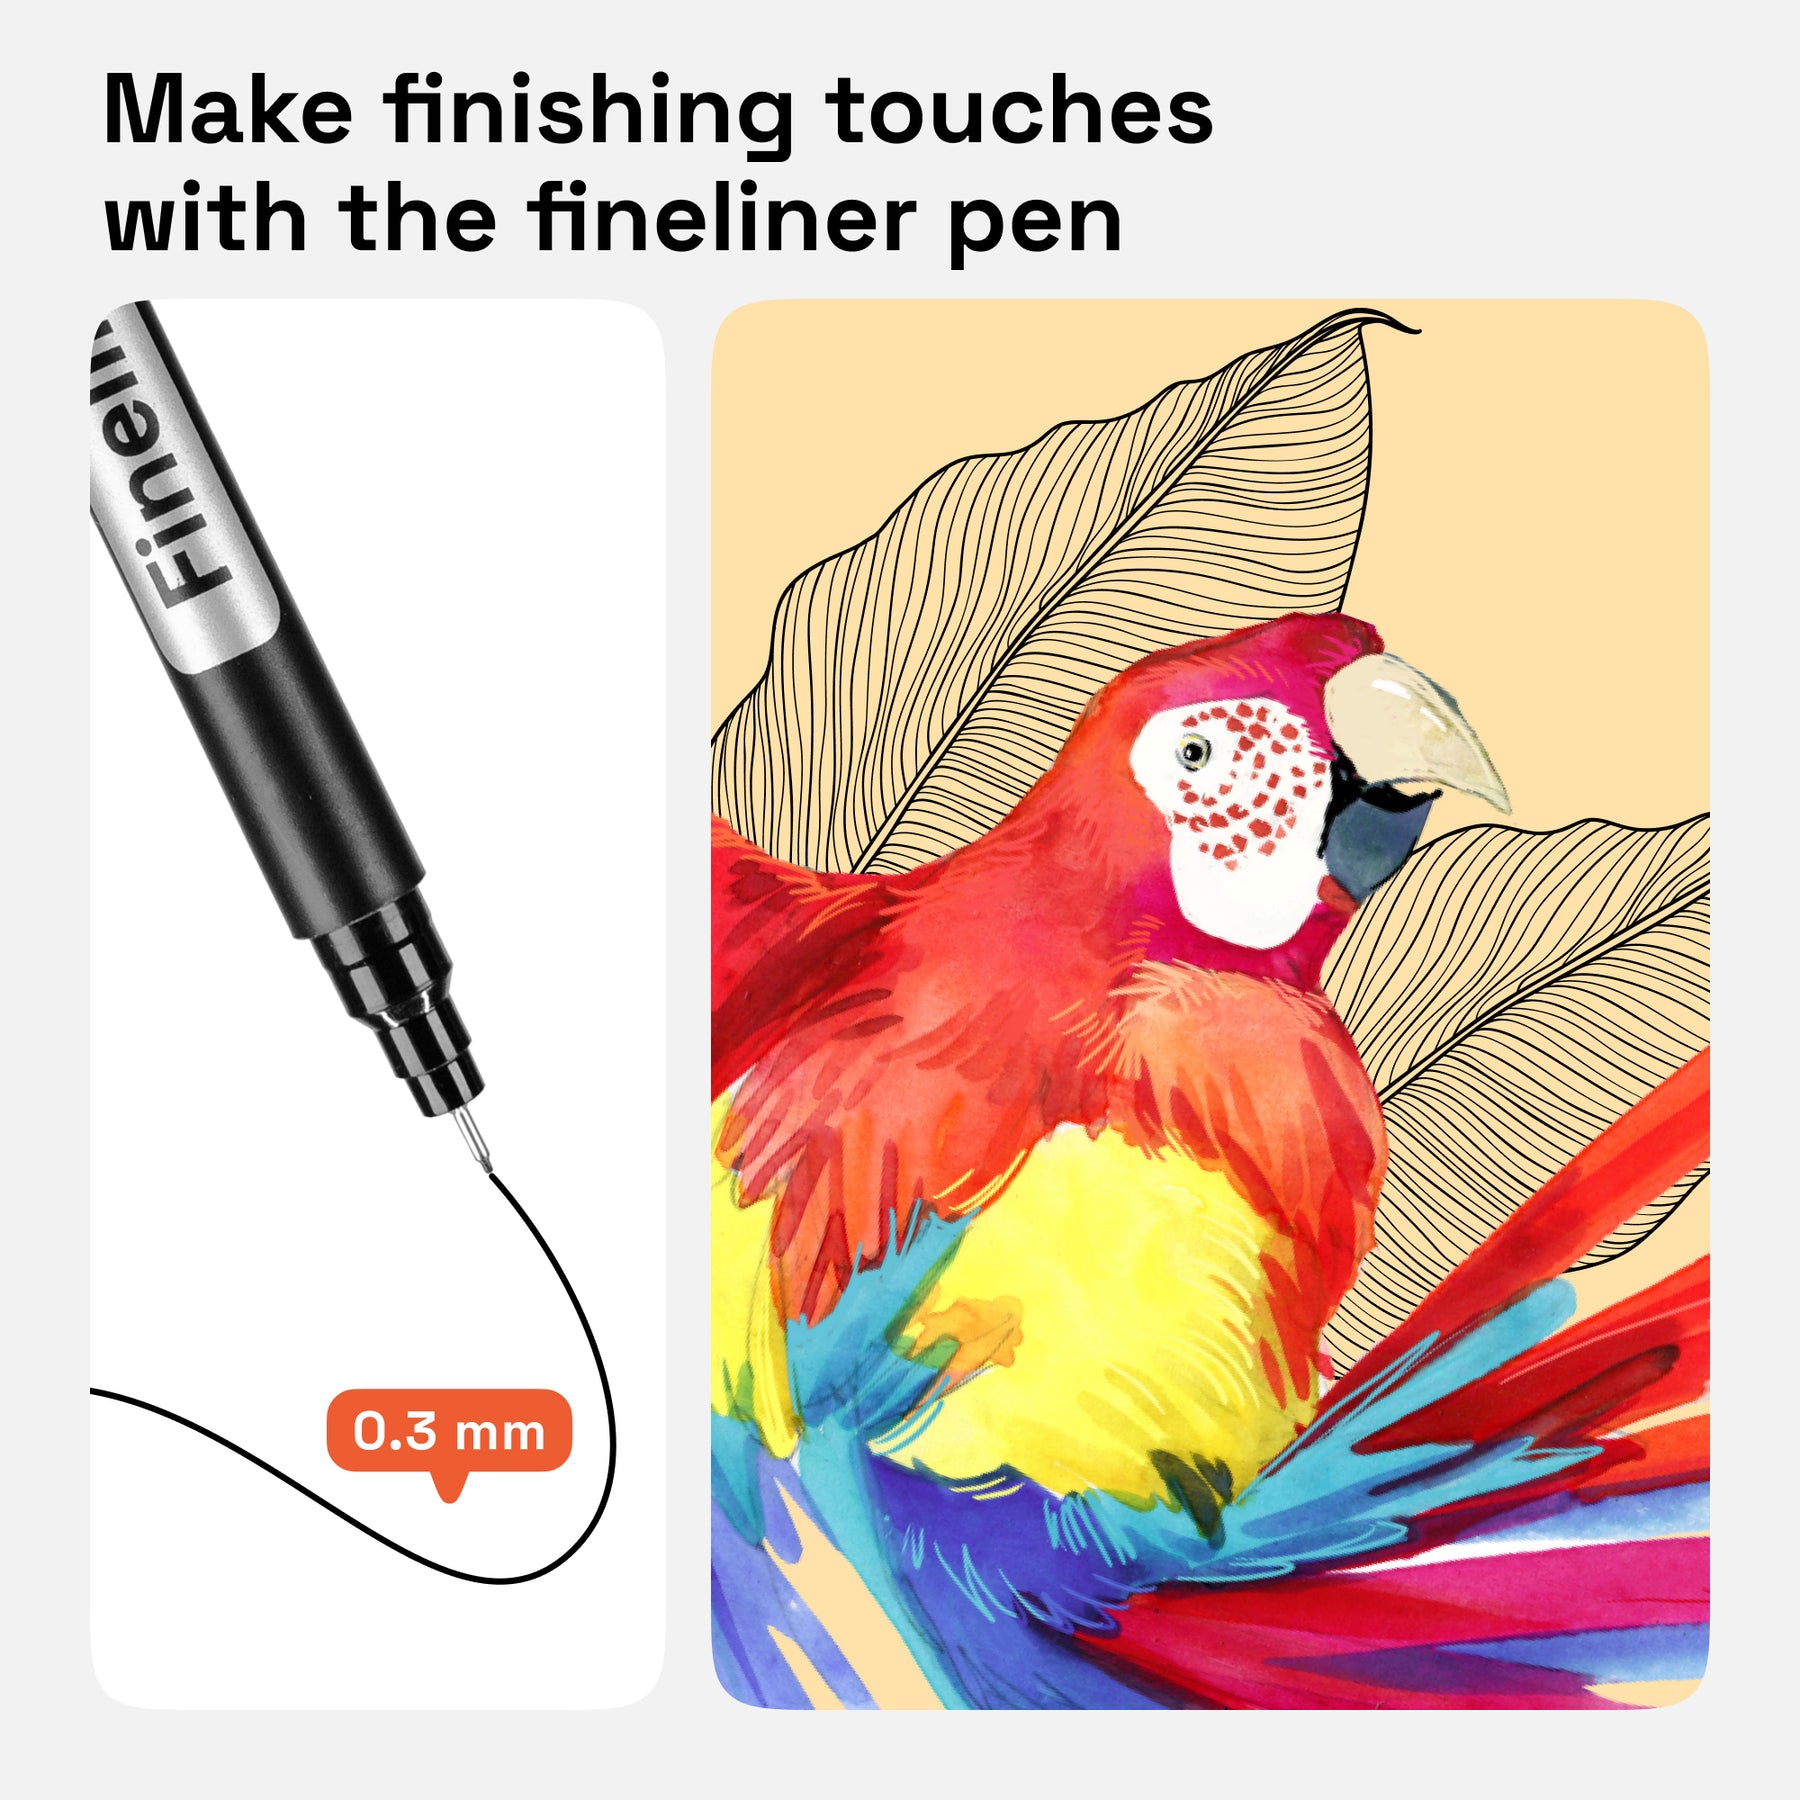 make finishing touches with the fineliner (0.3 mm) pen